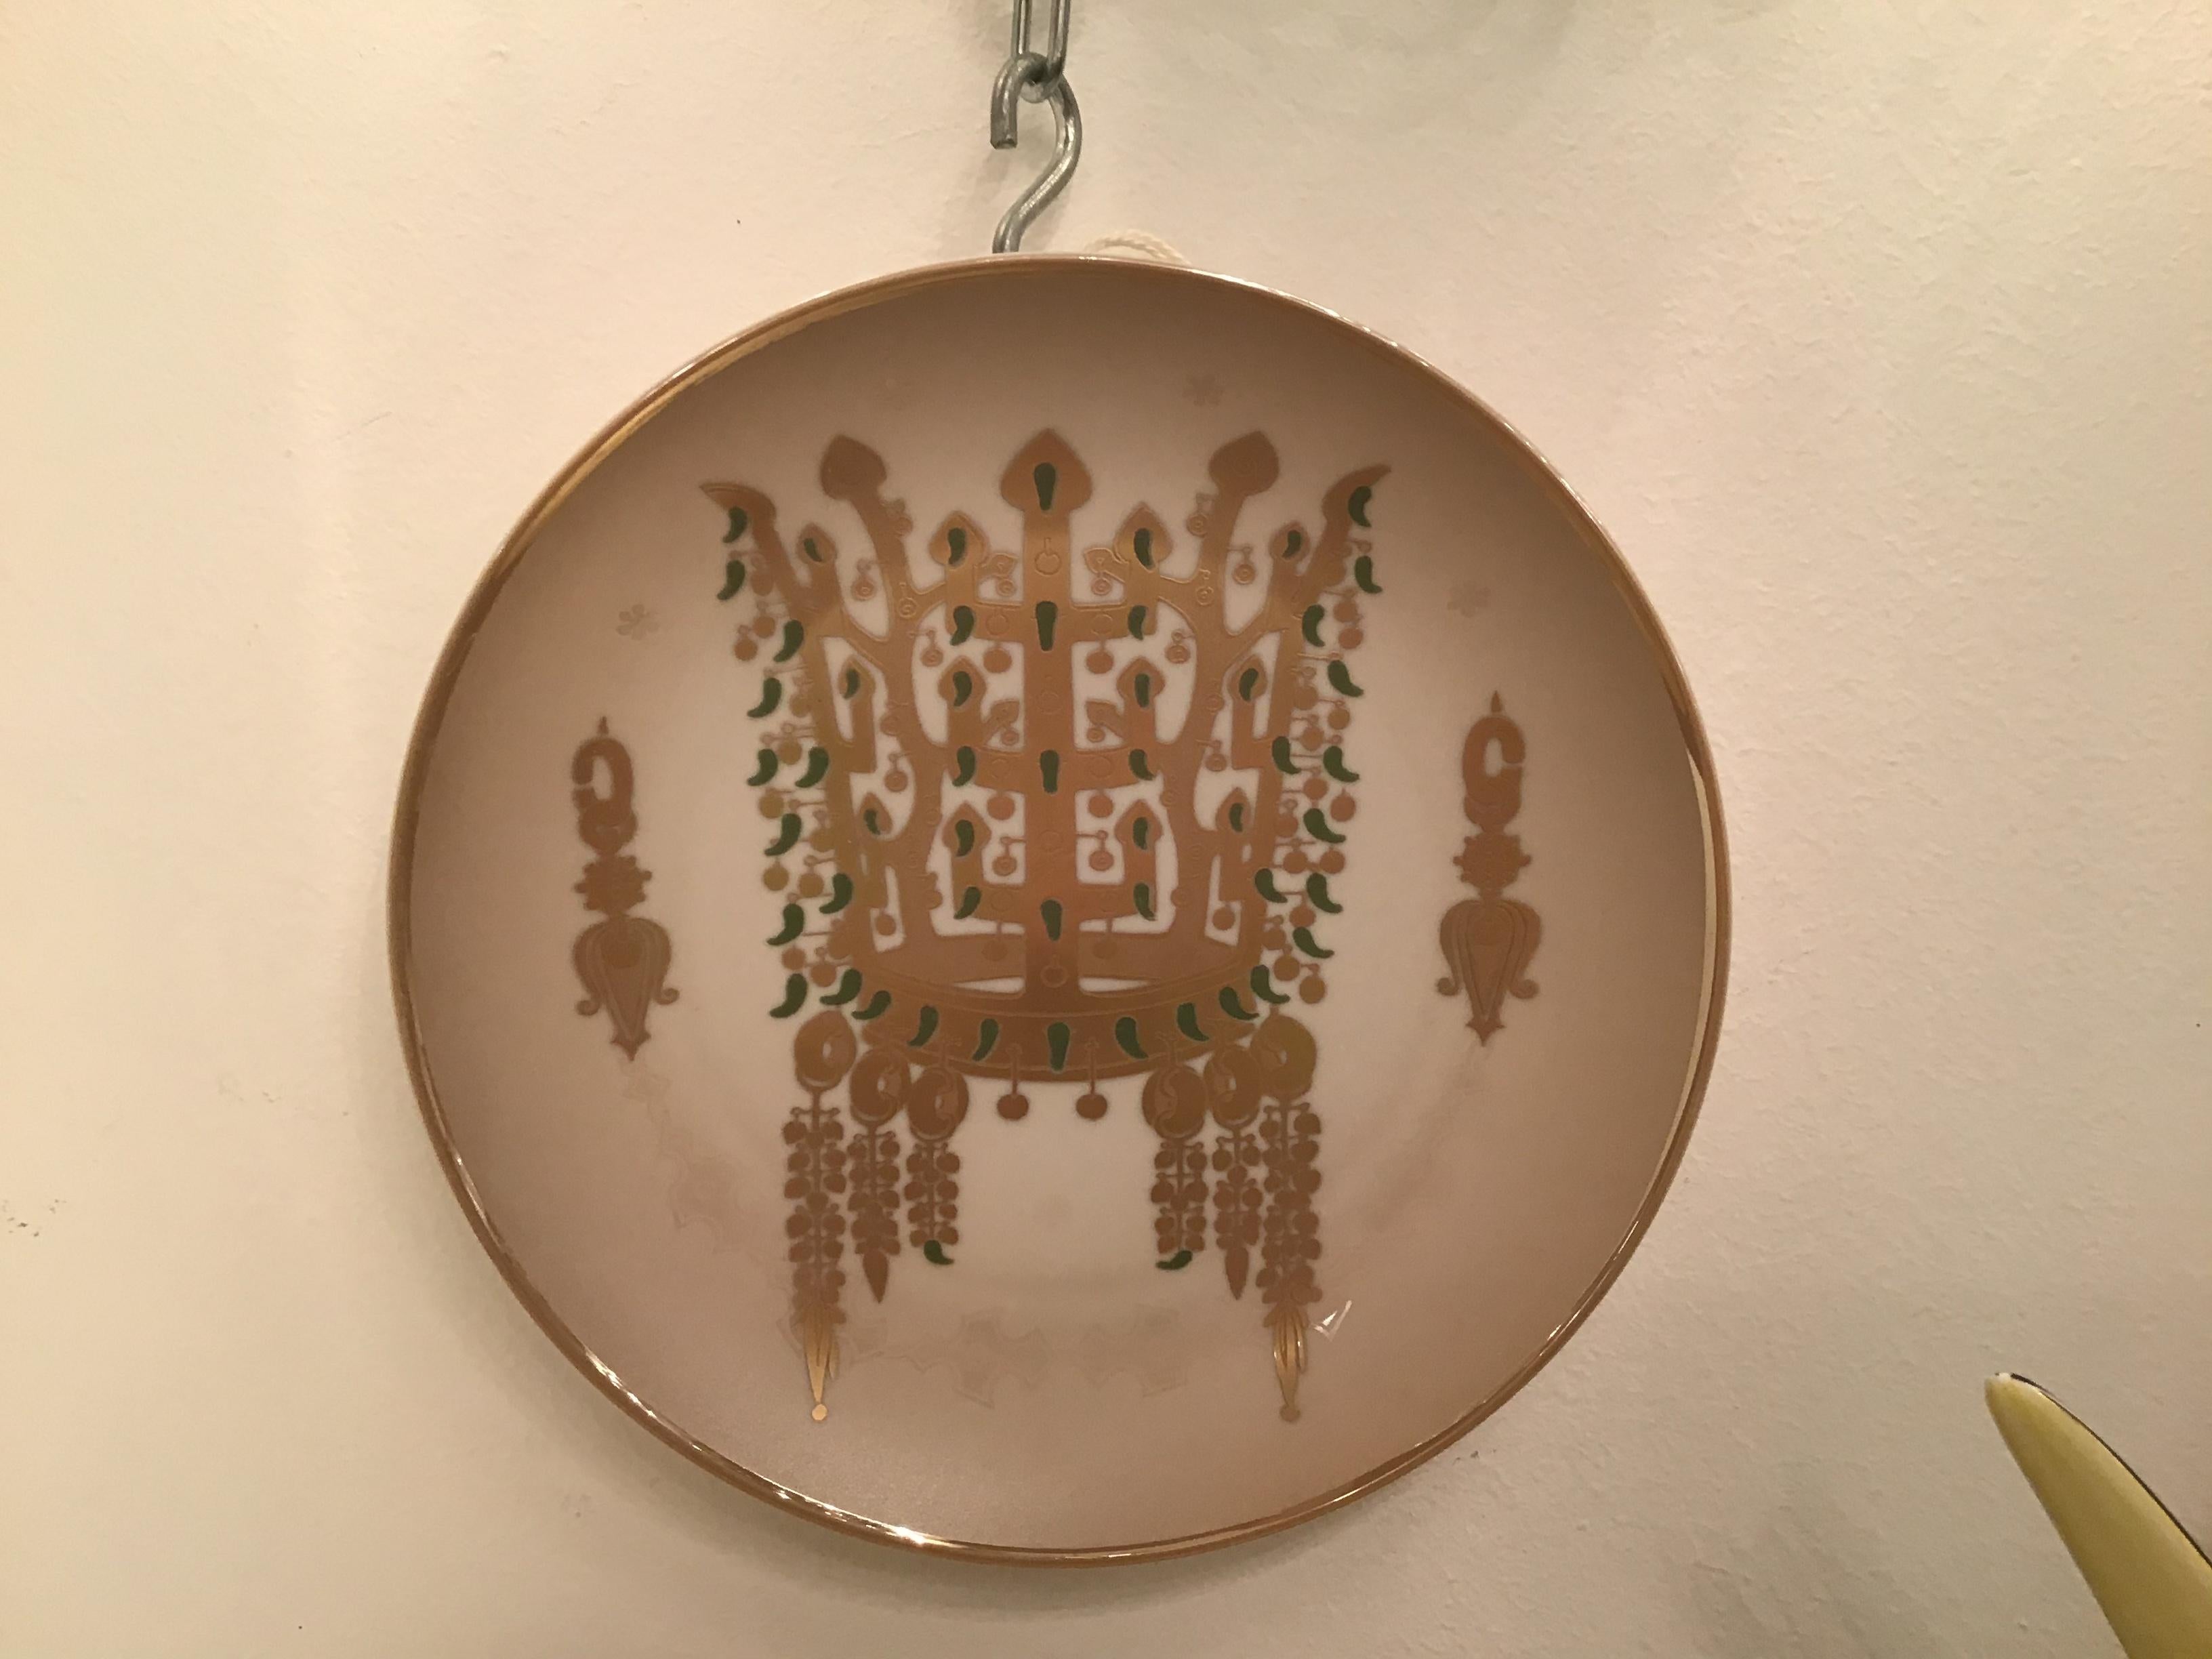 Morbelli Porcelain “Dinastia Silla” Wall Plates Worked with Pure Gold 1960 Italy For Sale 6